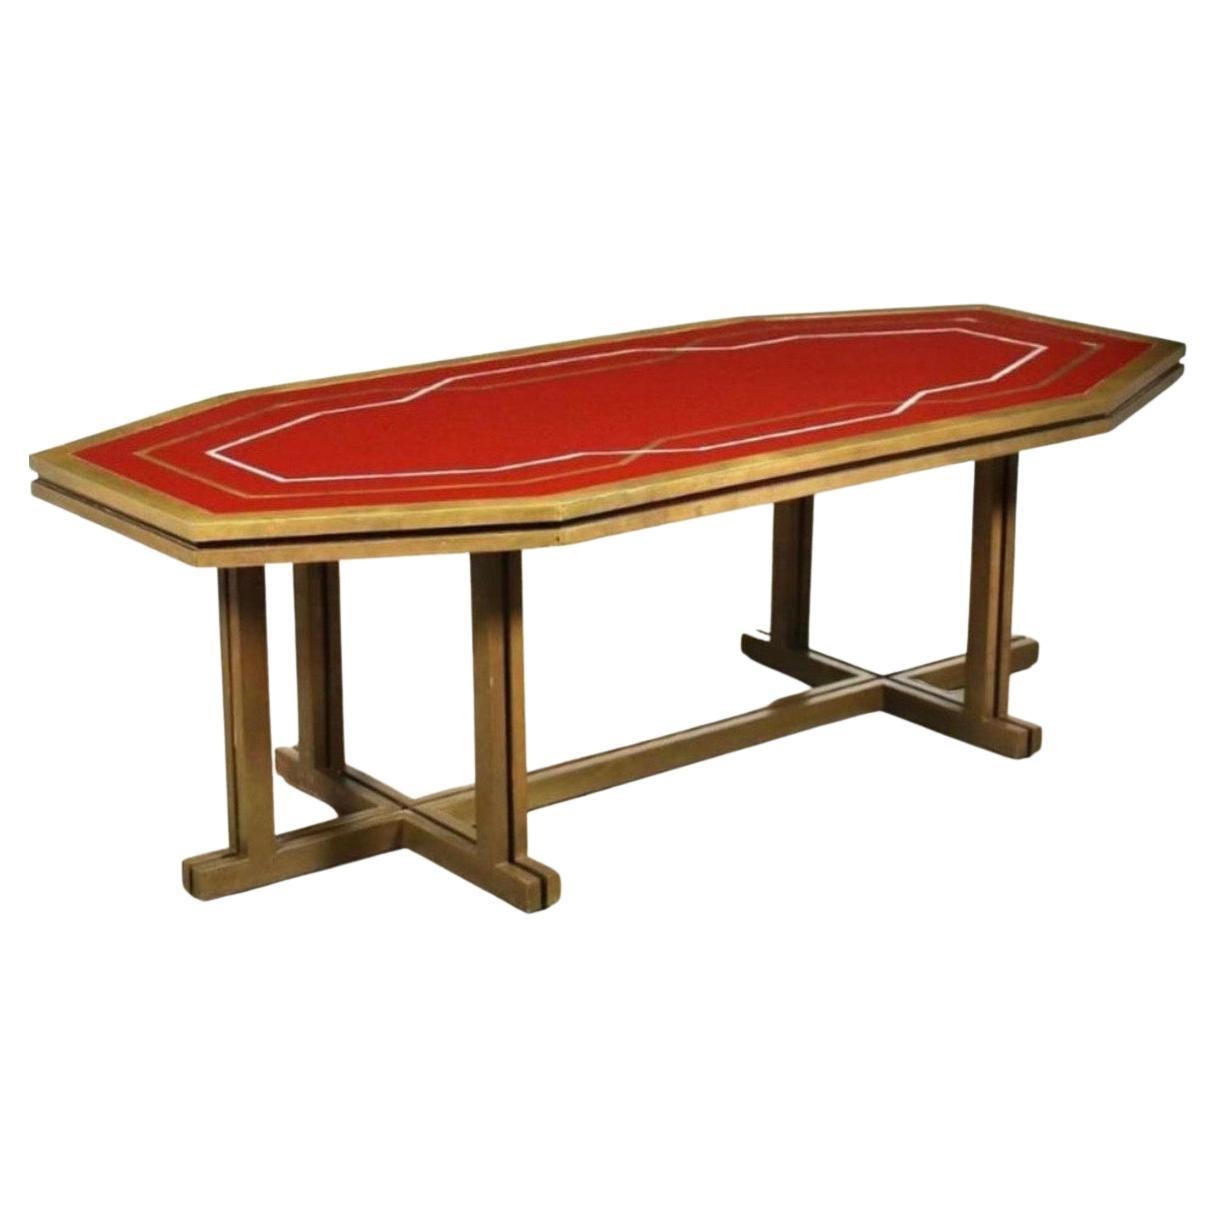 French Modern Neoclassical Brass & Red Lacquer Dining Table, Maison Jansen, 1970 For Sale